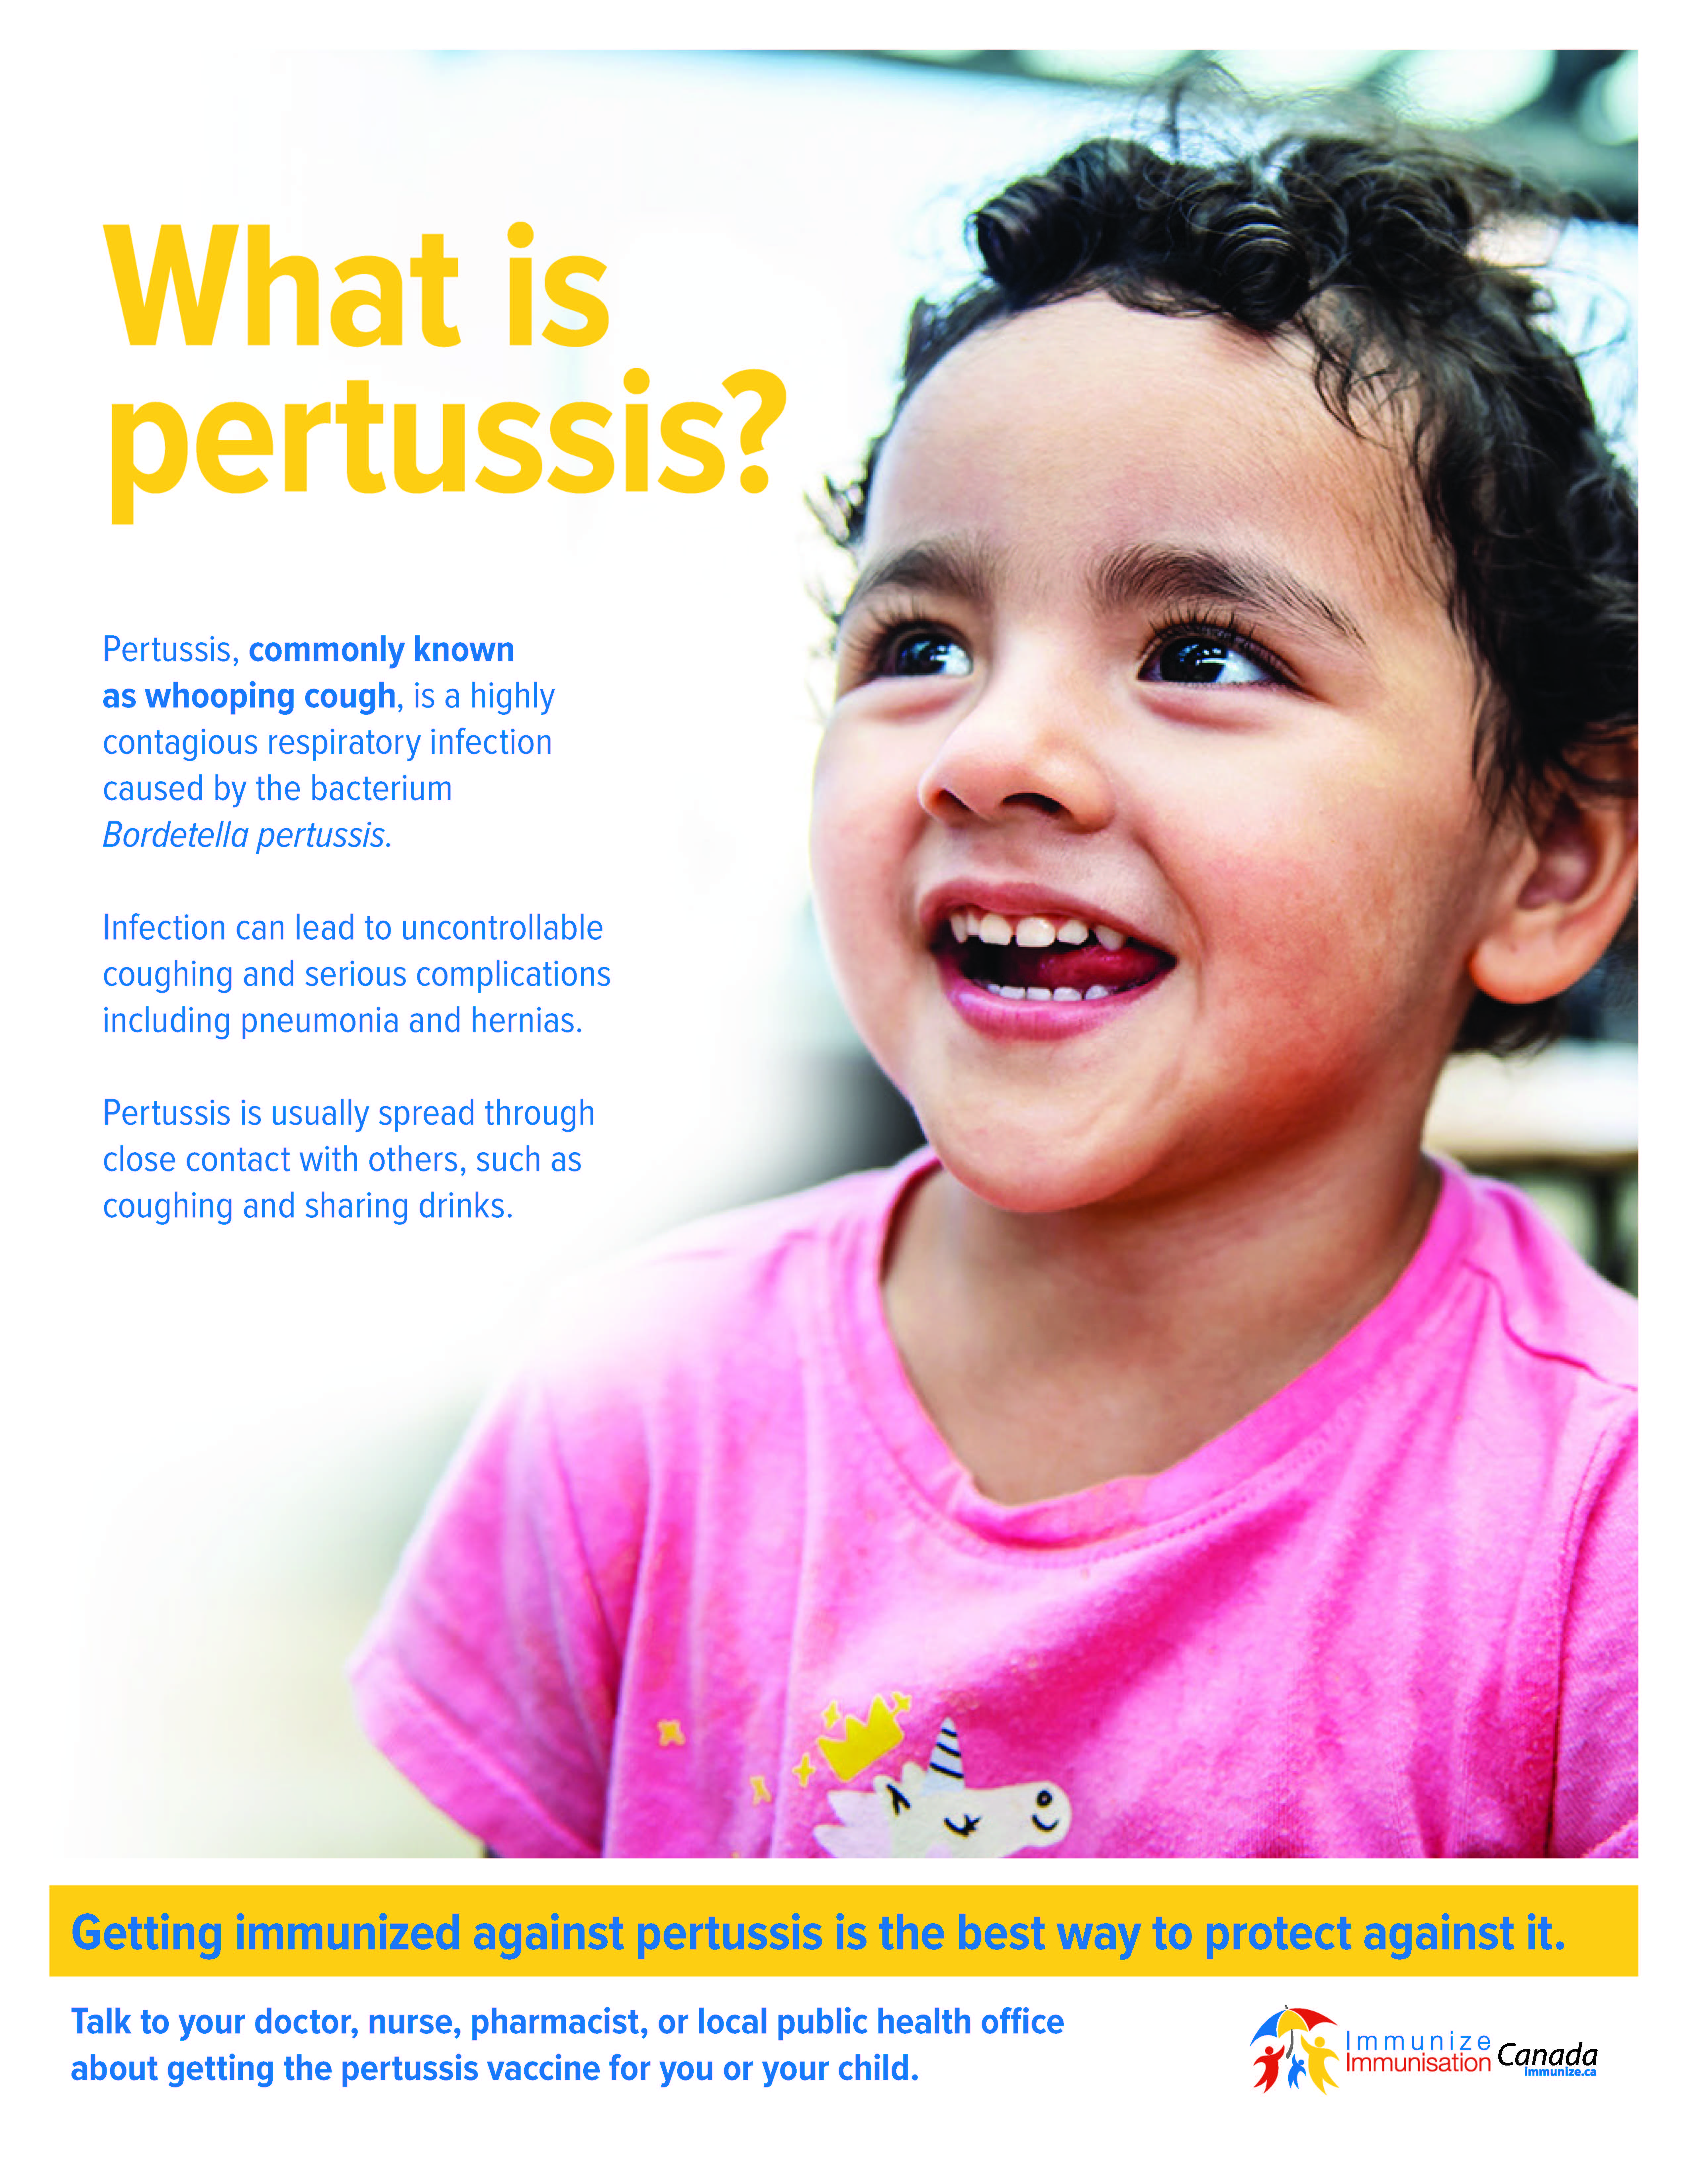 What is pertussis?